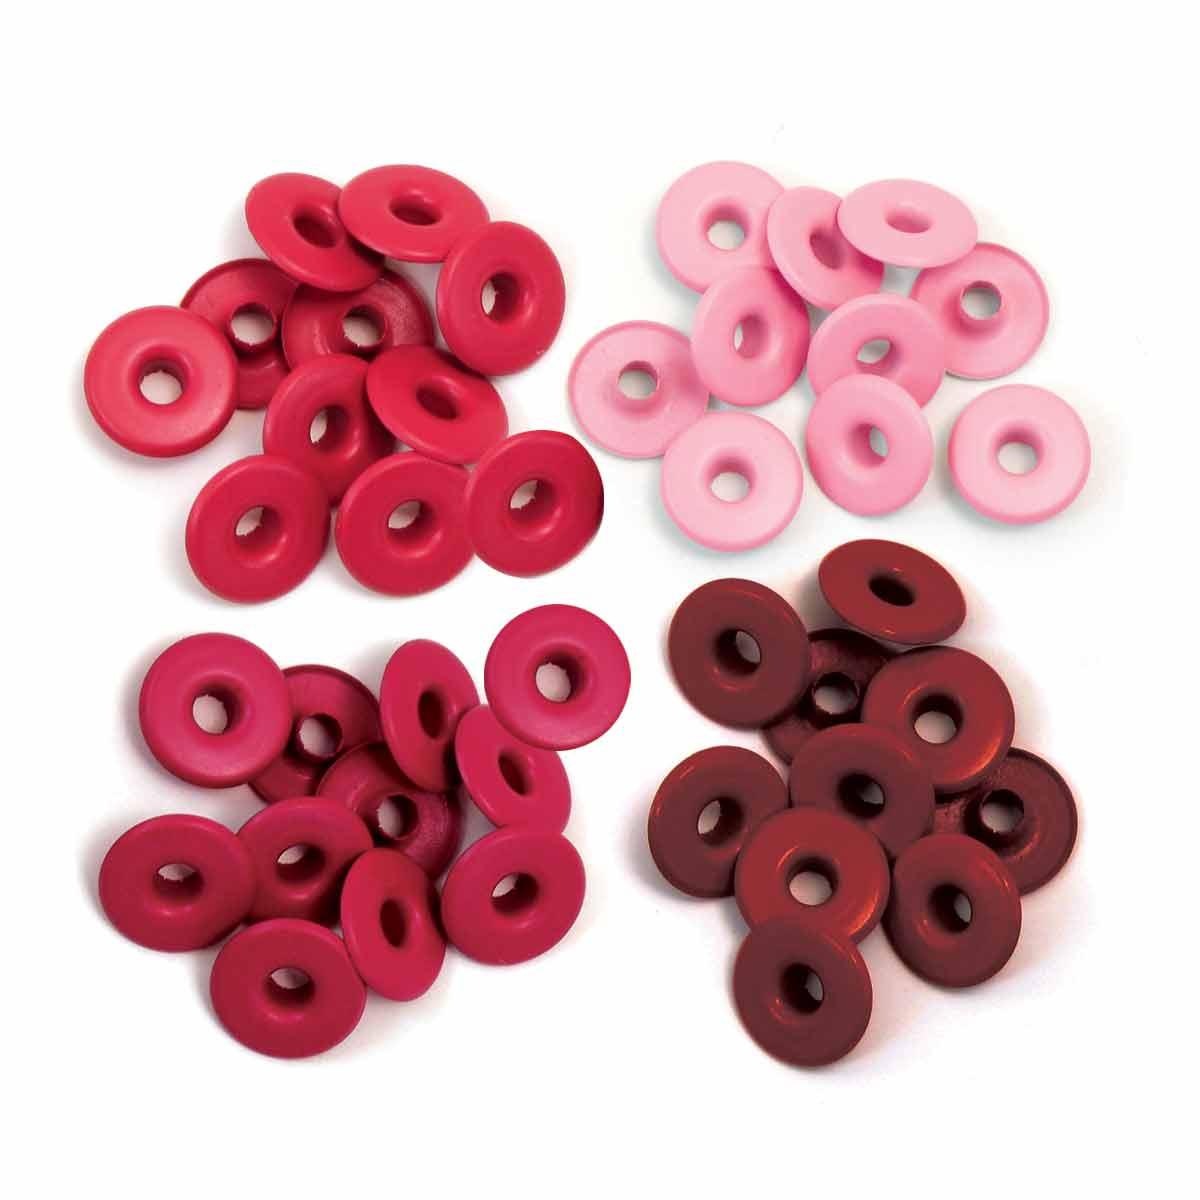 Wide Eyelets Collection Hues of Red .1875" Scrapbook Eyelets by We R Memory Keepers - 40 Pieces (10 of each color) - Scrapbook Supply Companies